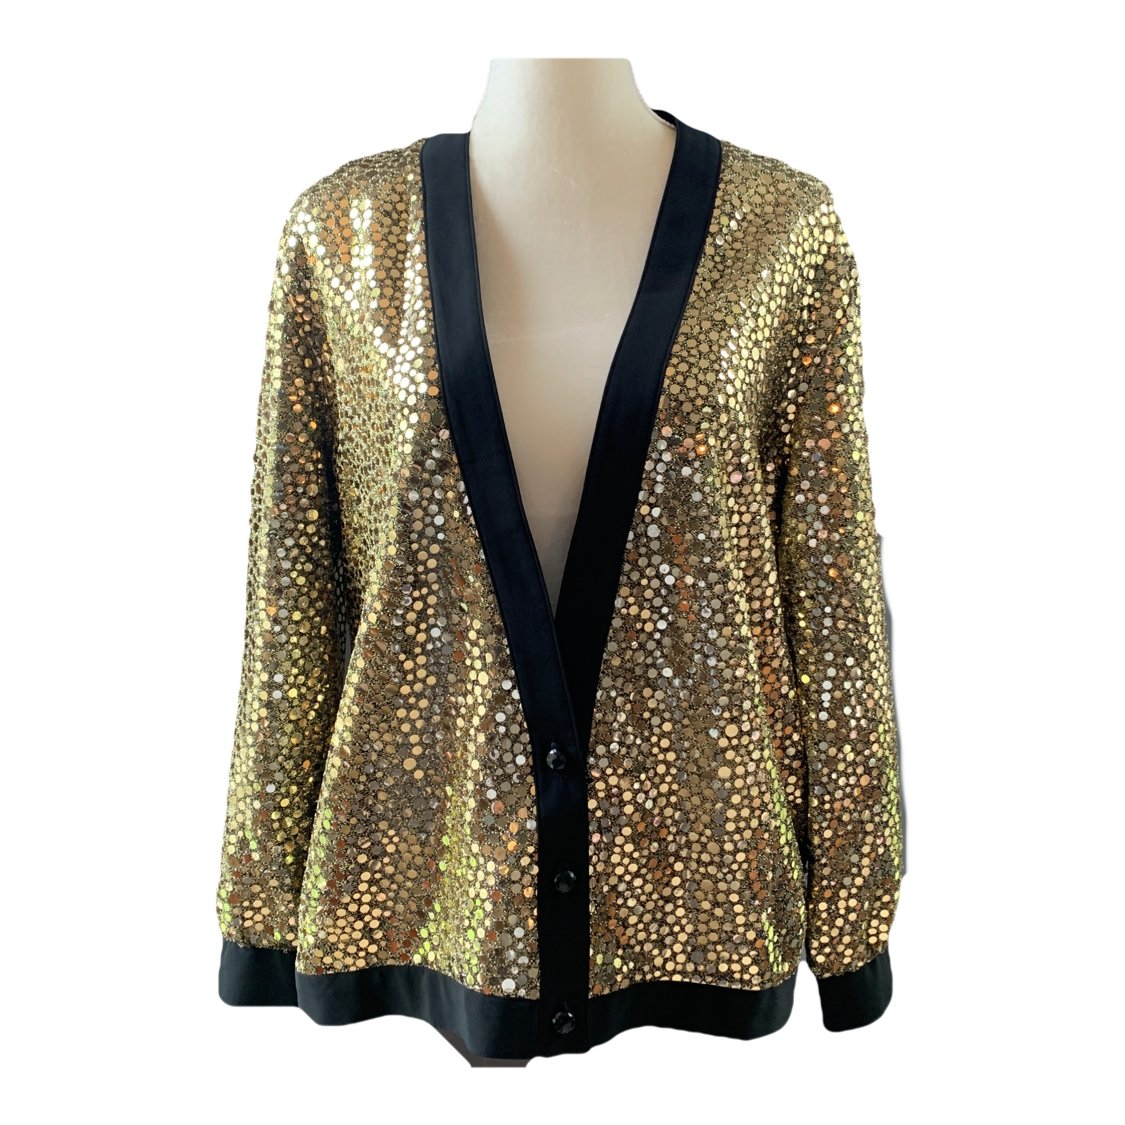 Vintage Gold Sequin Cardigan or Jacket by Edith Flagg's Three V